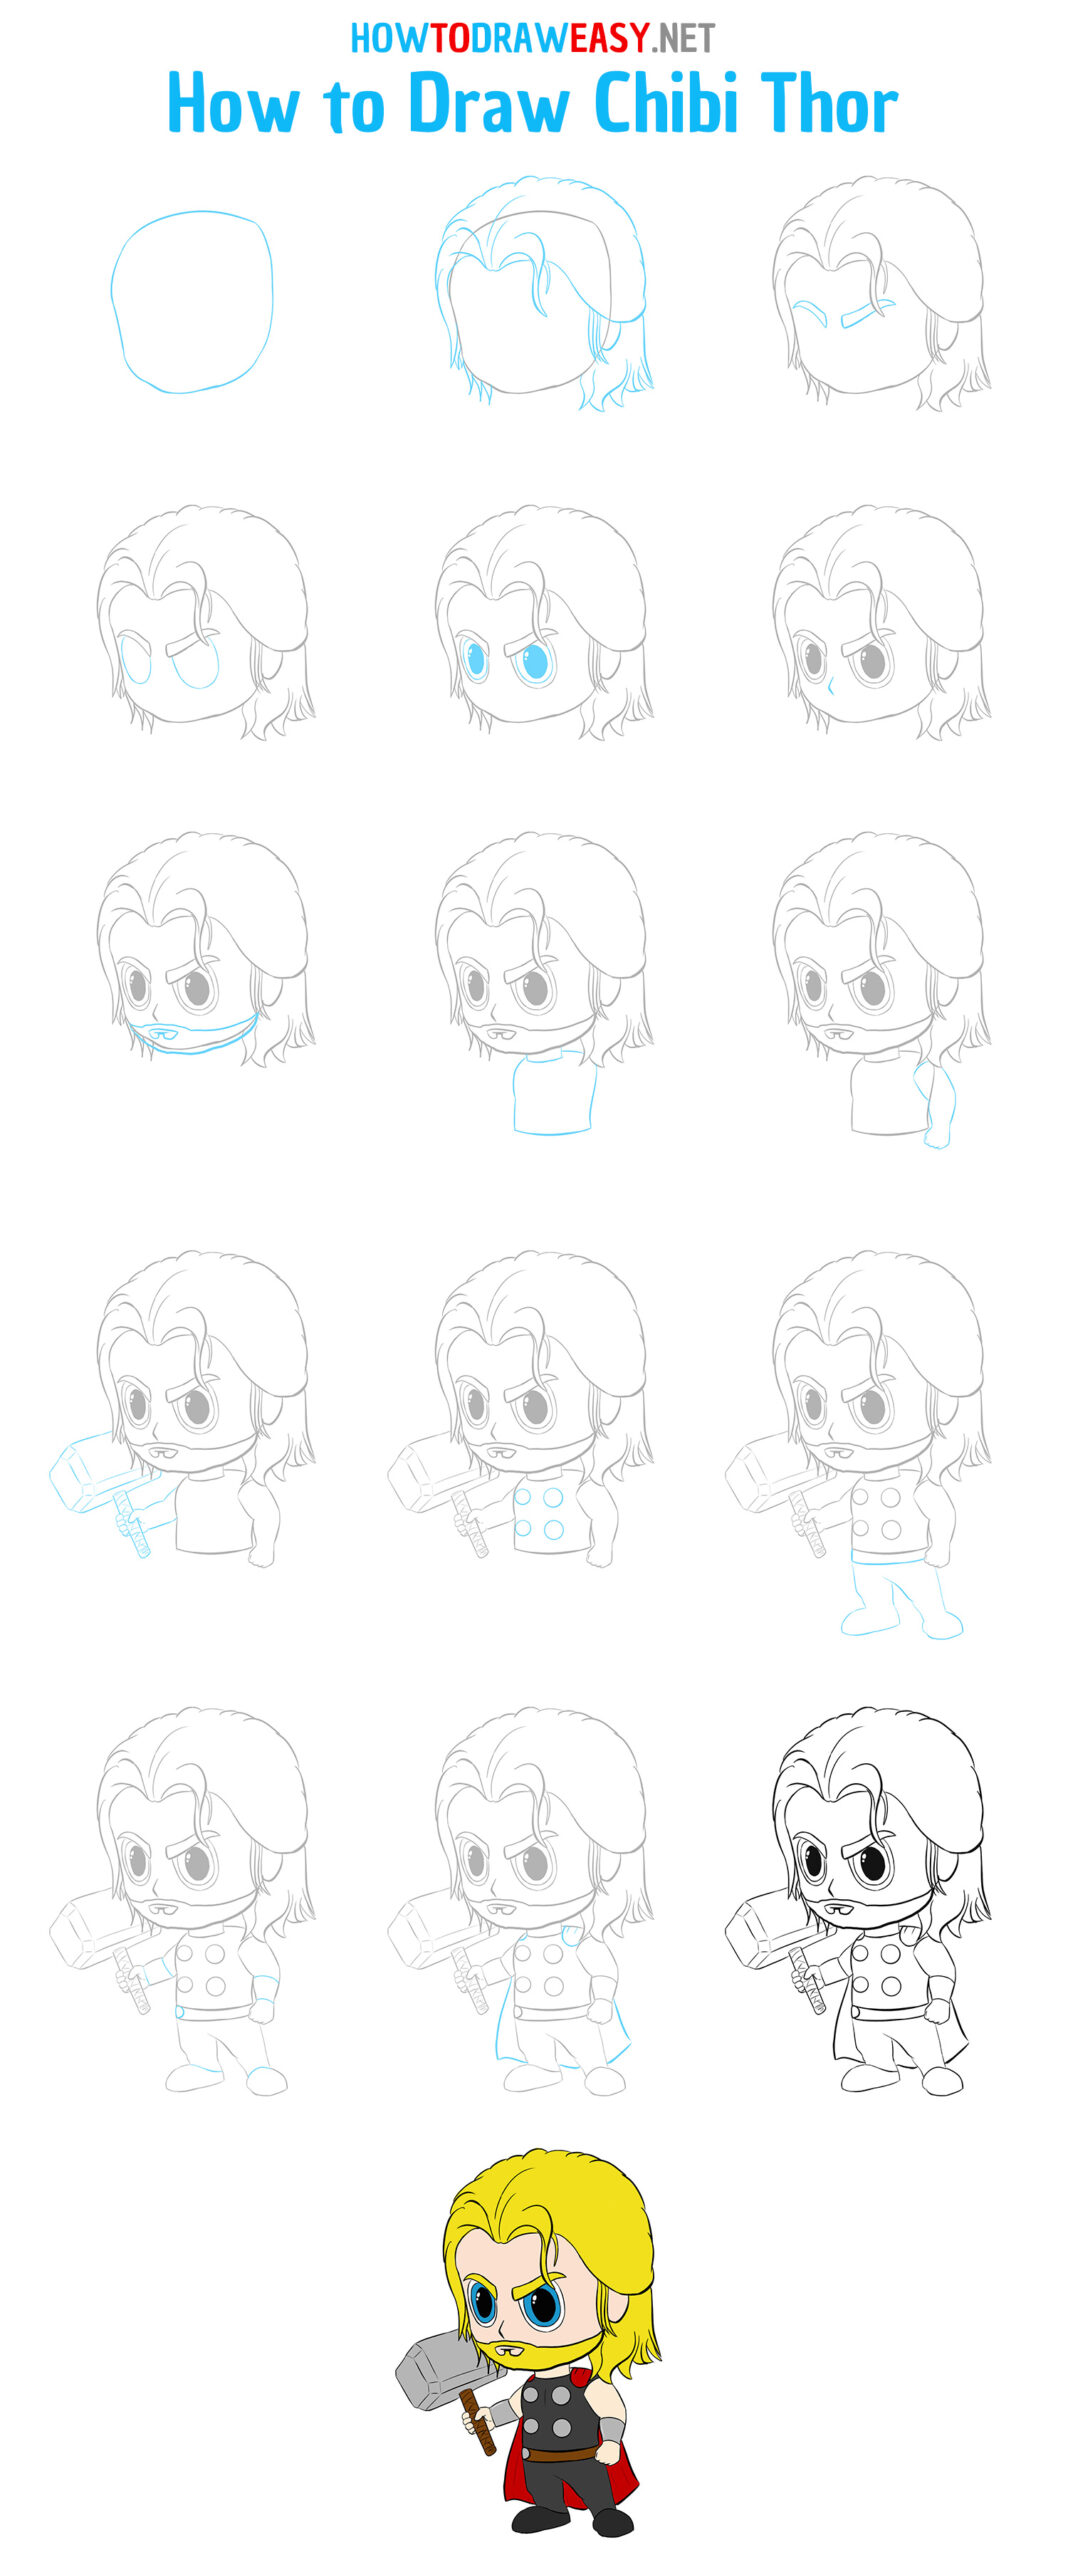 How to Draw Chibi Thor Step by Step